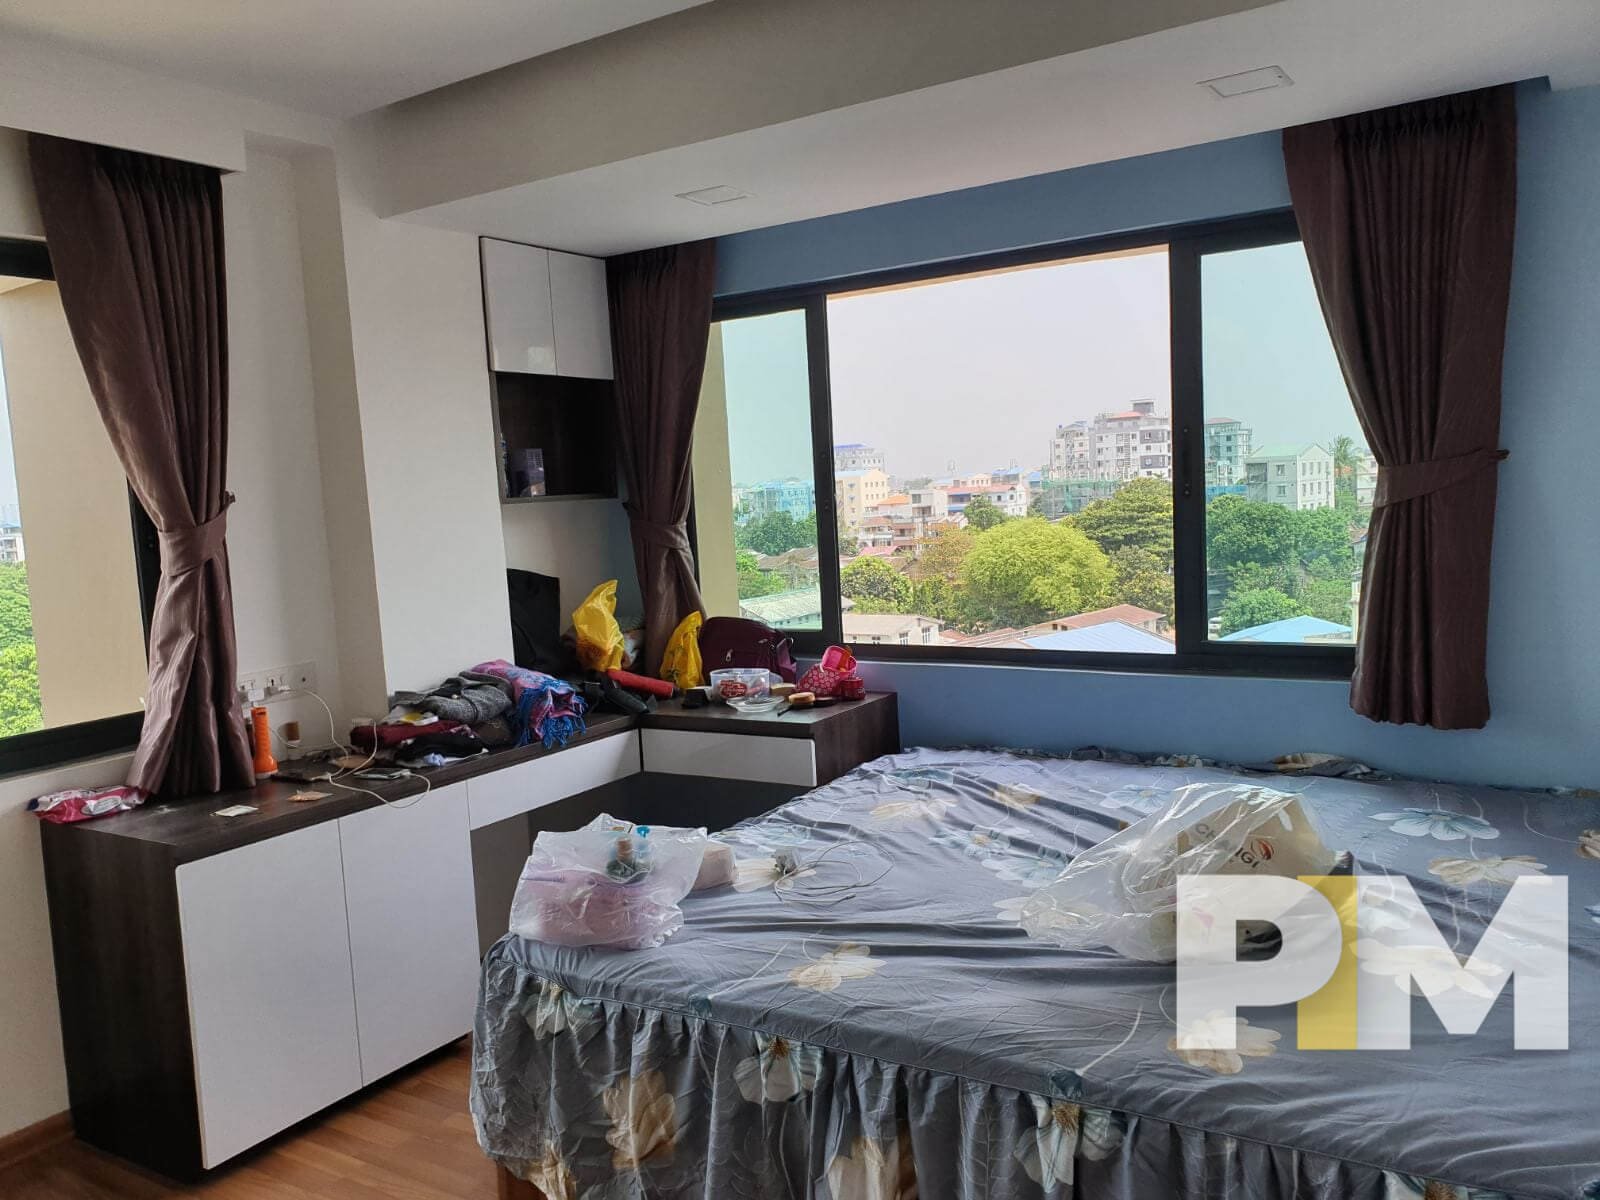 bedroom with bed and mattress - Home Rental Yangon